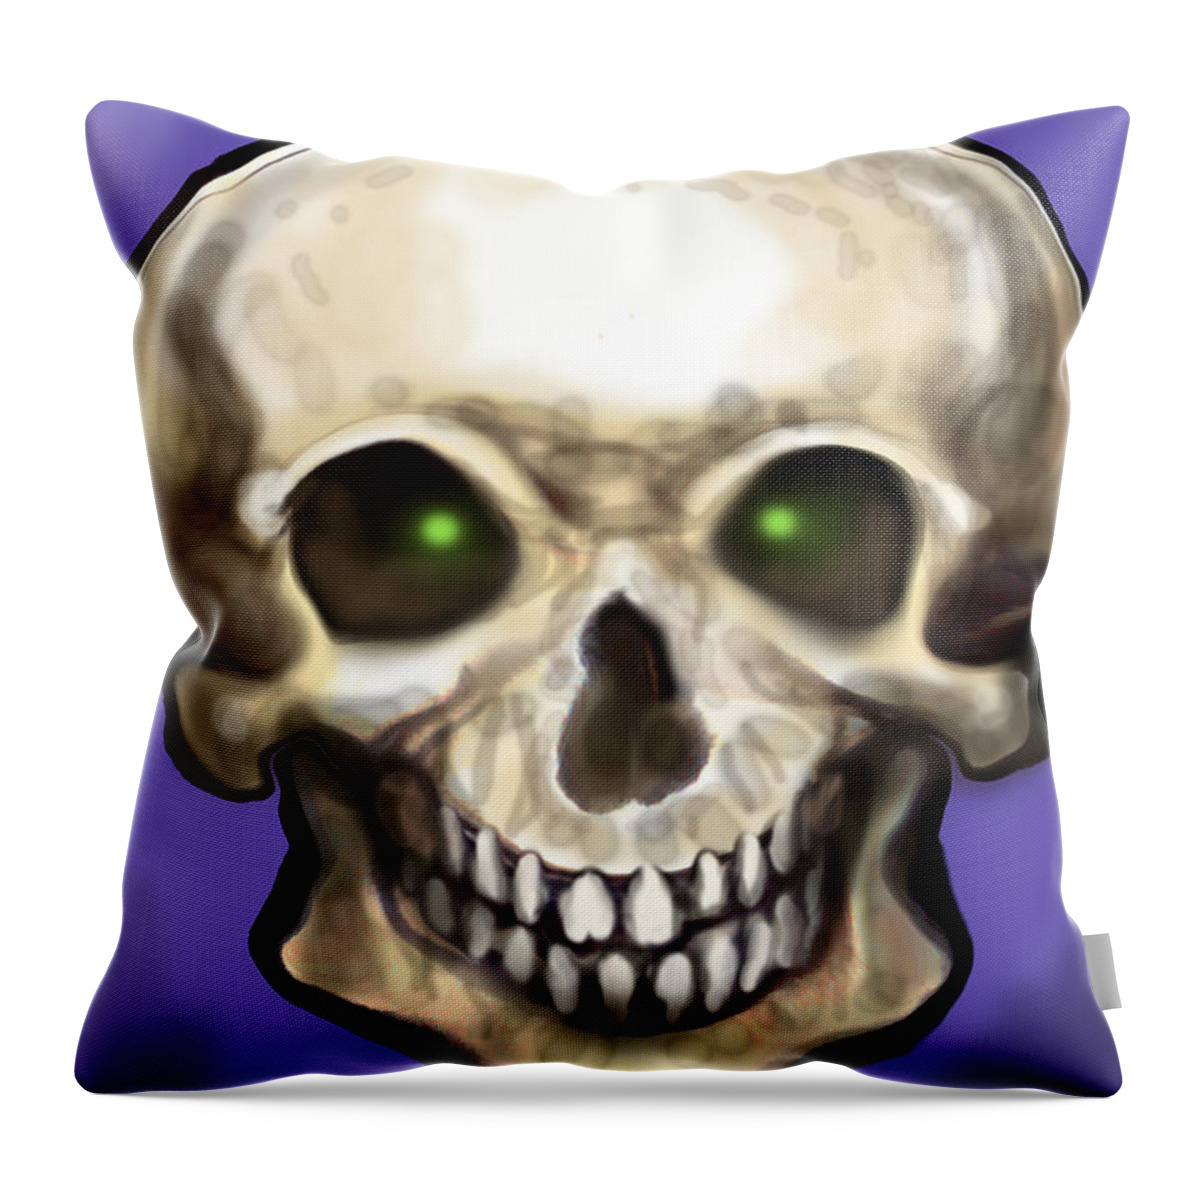 Skull Throw Pillow featuring the painting Skull by Kevin Middleton